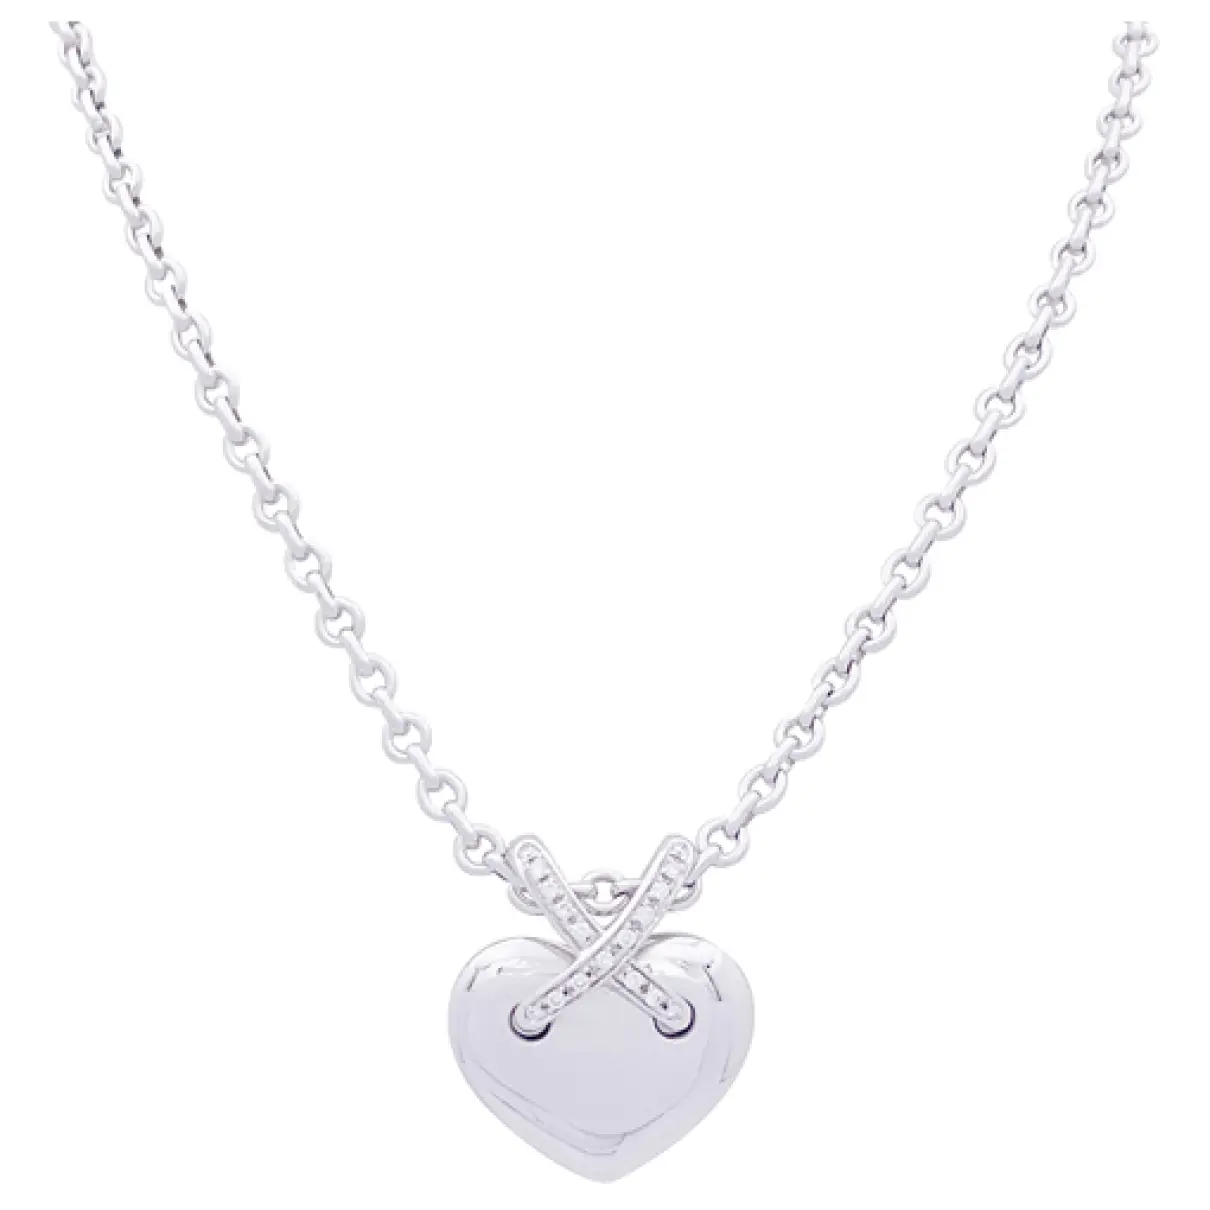 Liens white gold necklace